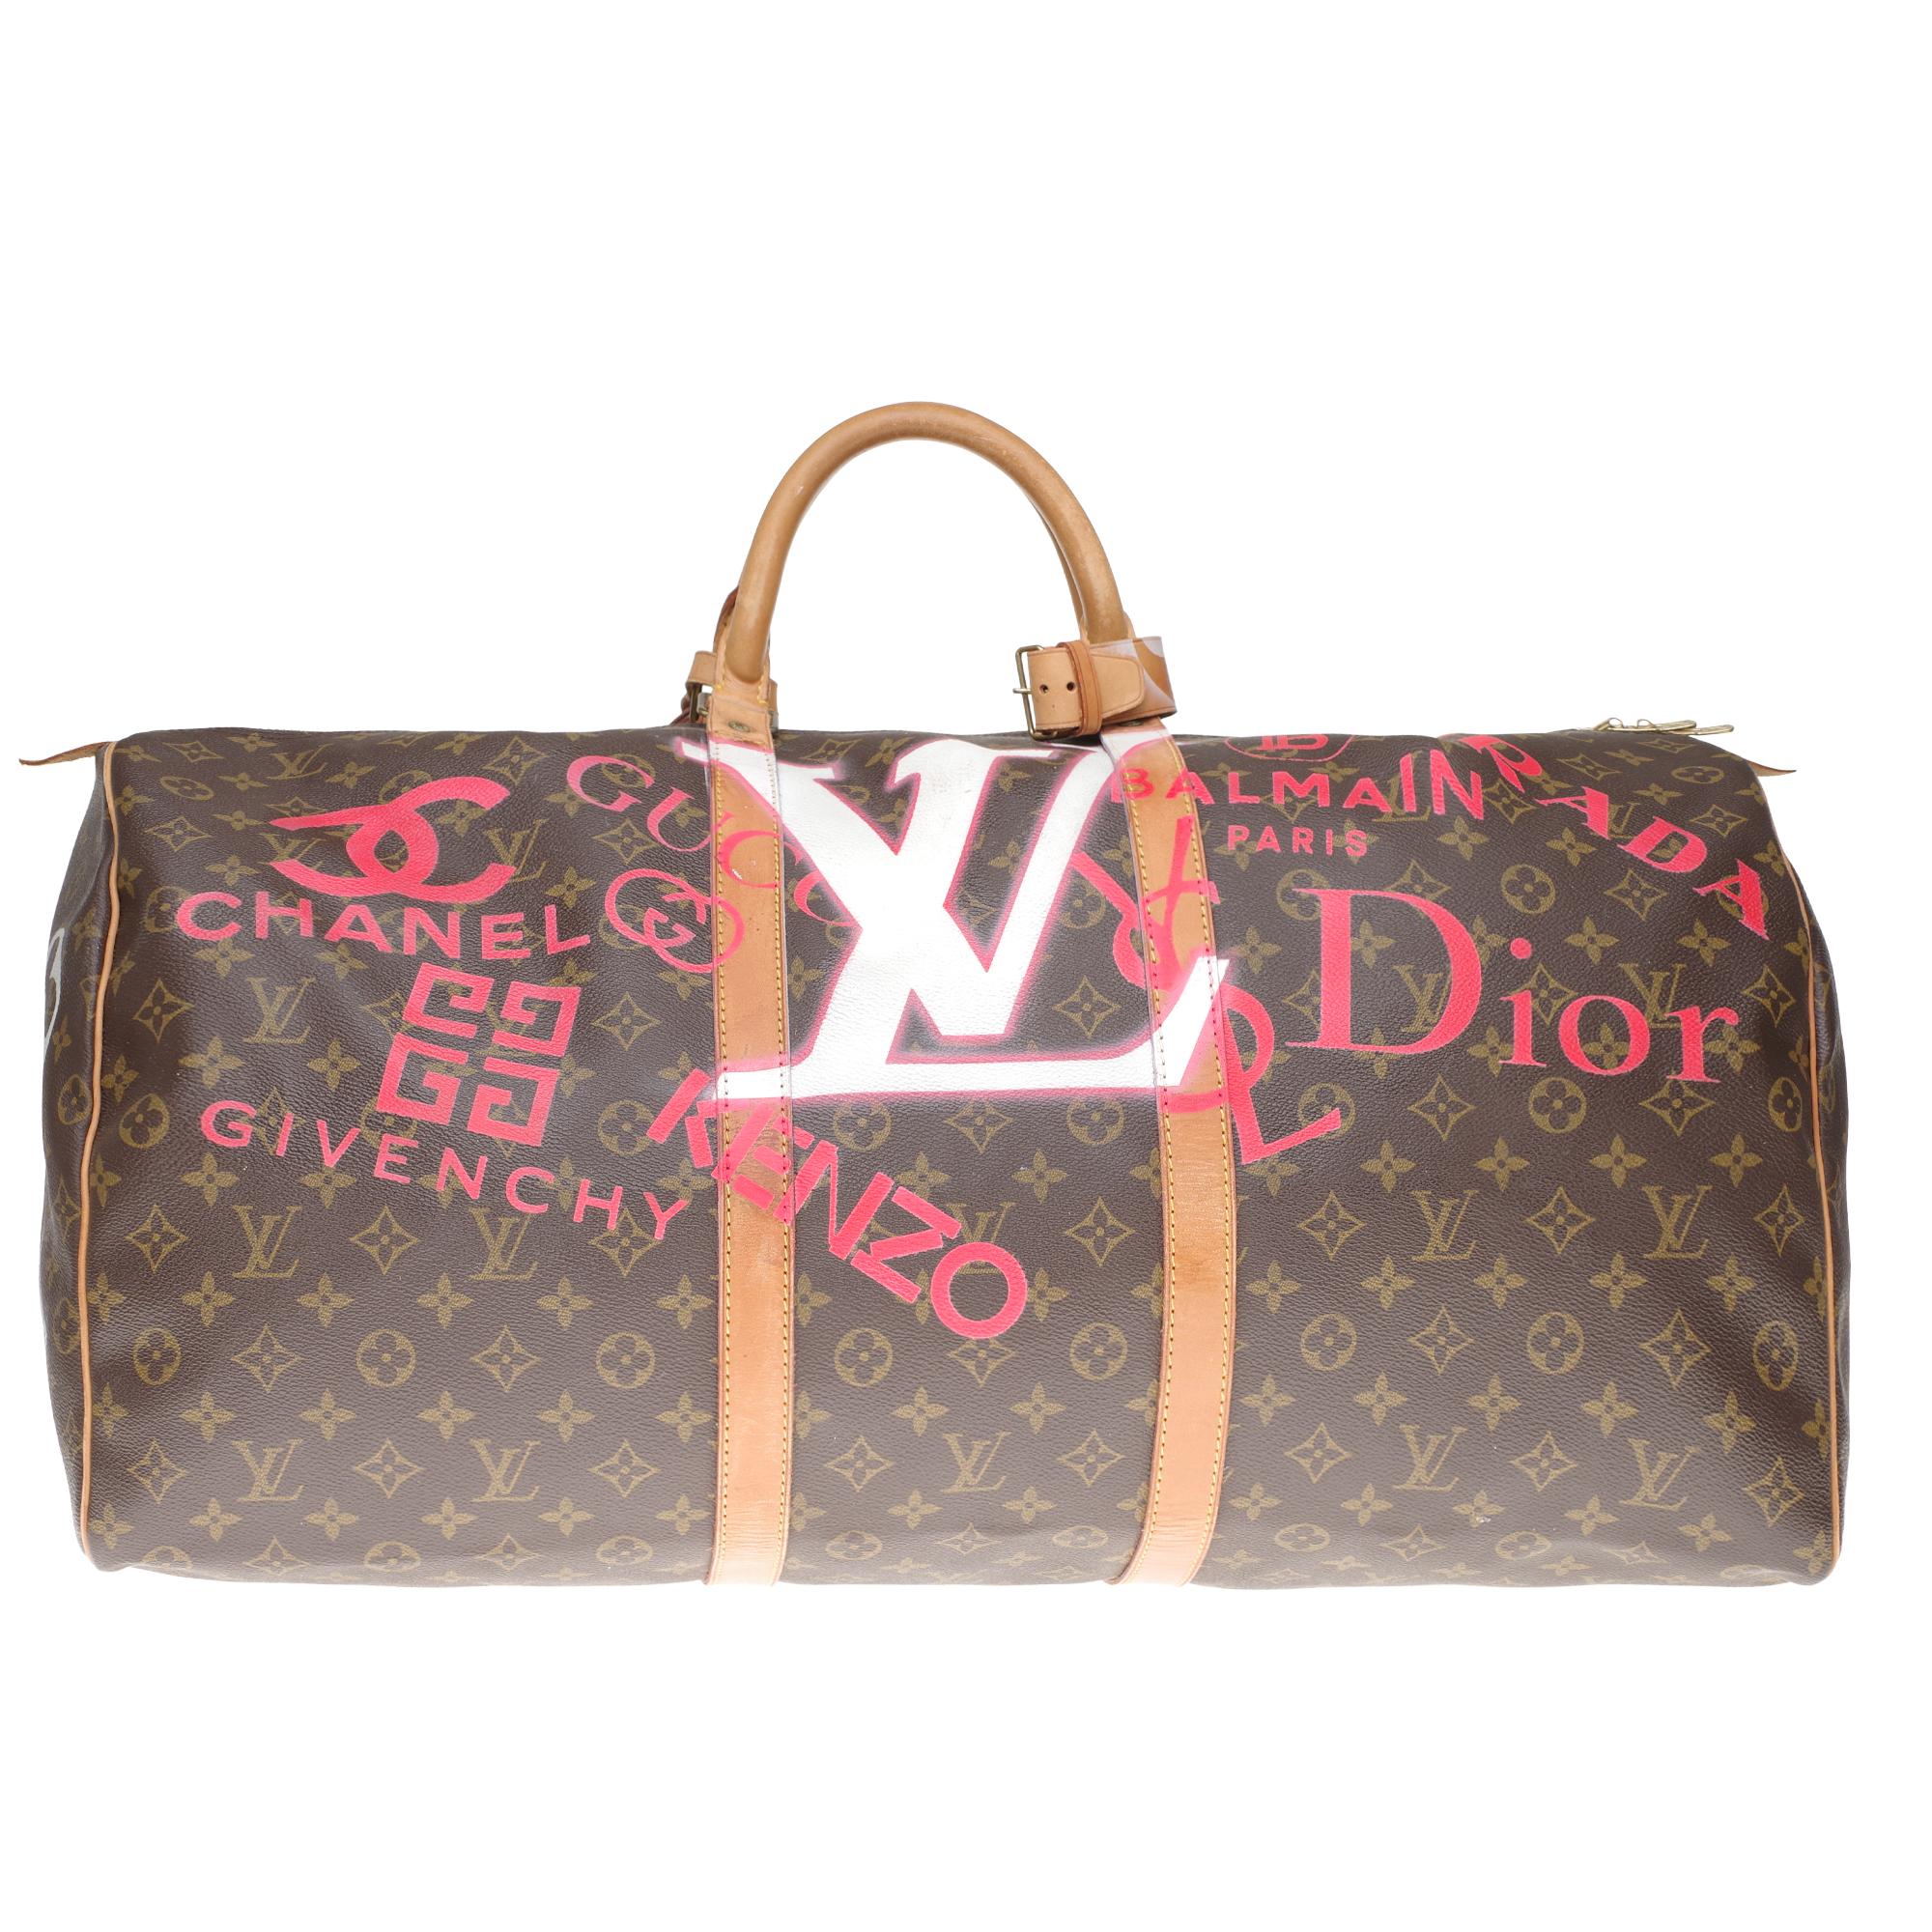 Exceptional travel bag Louis Vuitton Keepall 60 cm in brown monogram canvas and natural leather customized 